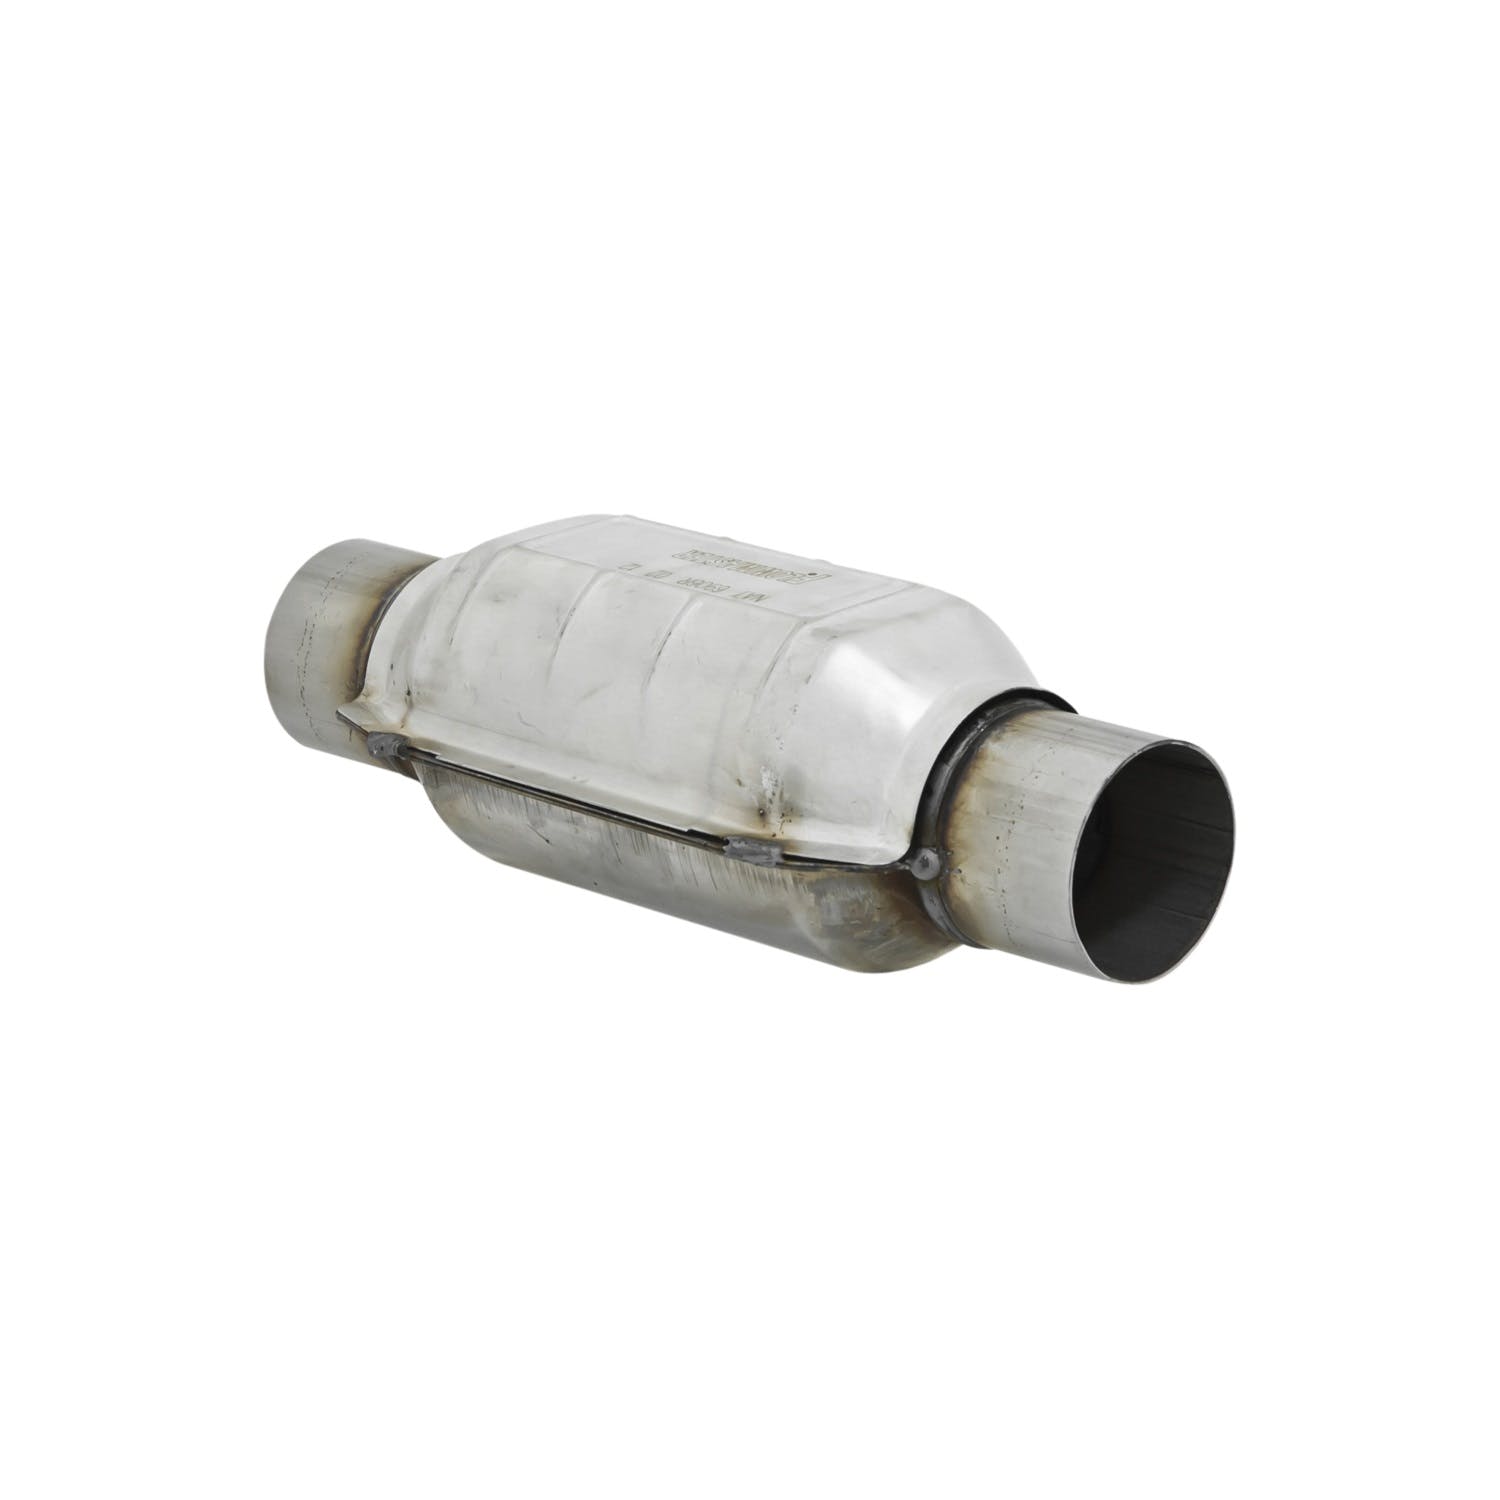 Flowmaster Catalytic Converters 2220124 Catalytic Converter-Universal-222 Series-2.25 in. Inlet/Outlet-49 State